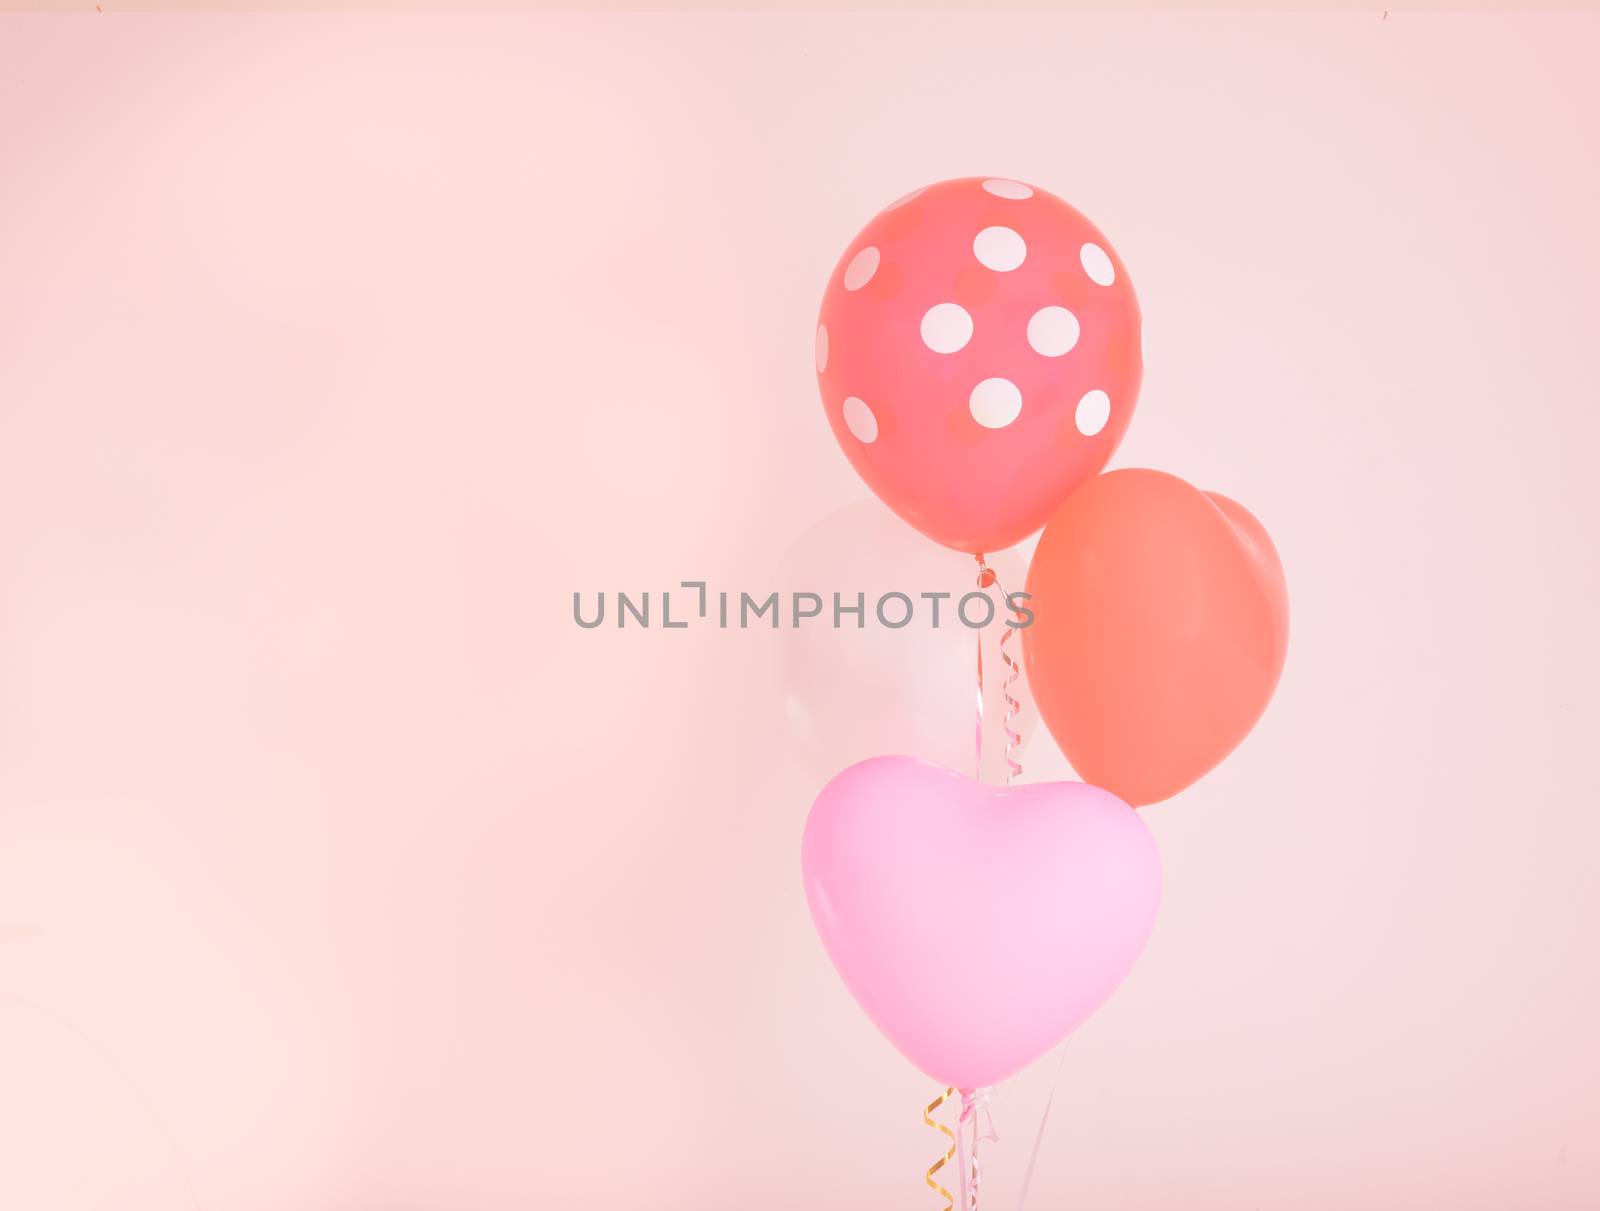 Fastive heart shape balloons on pink wall with vintage filter effect